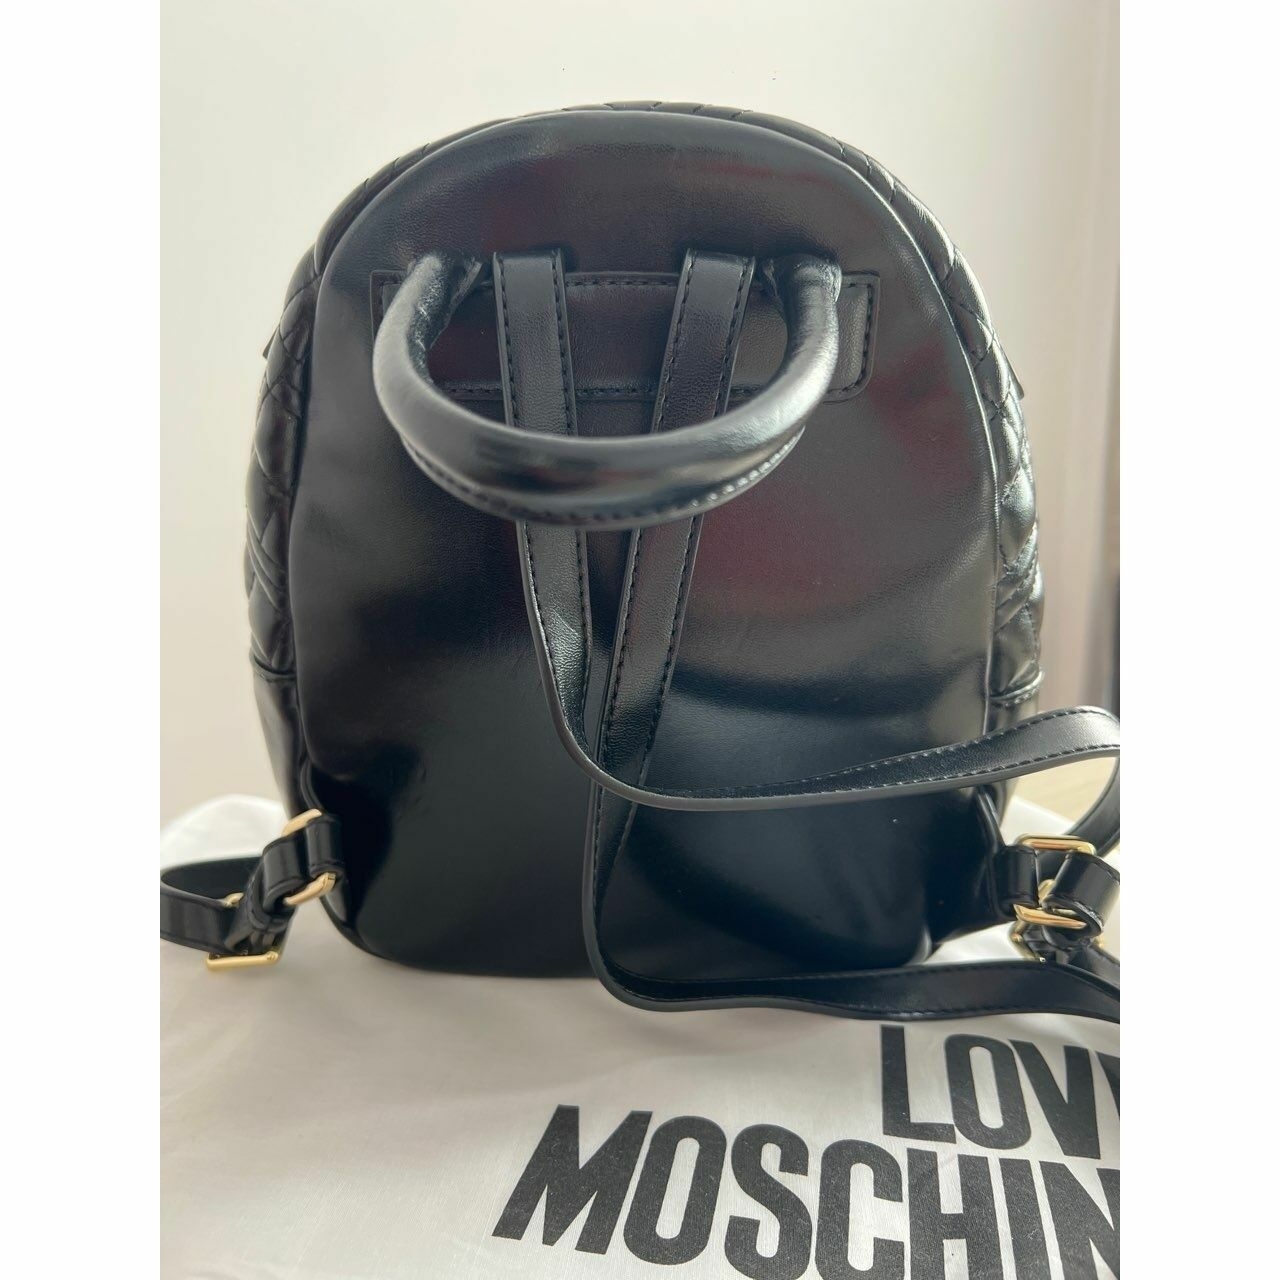 Love Moschino Black Houndstooth Backpack